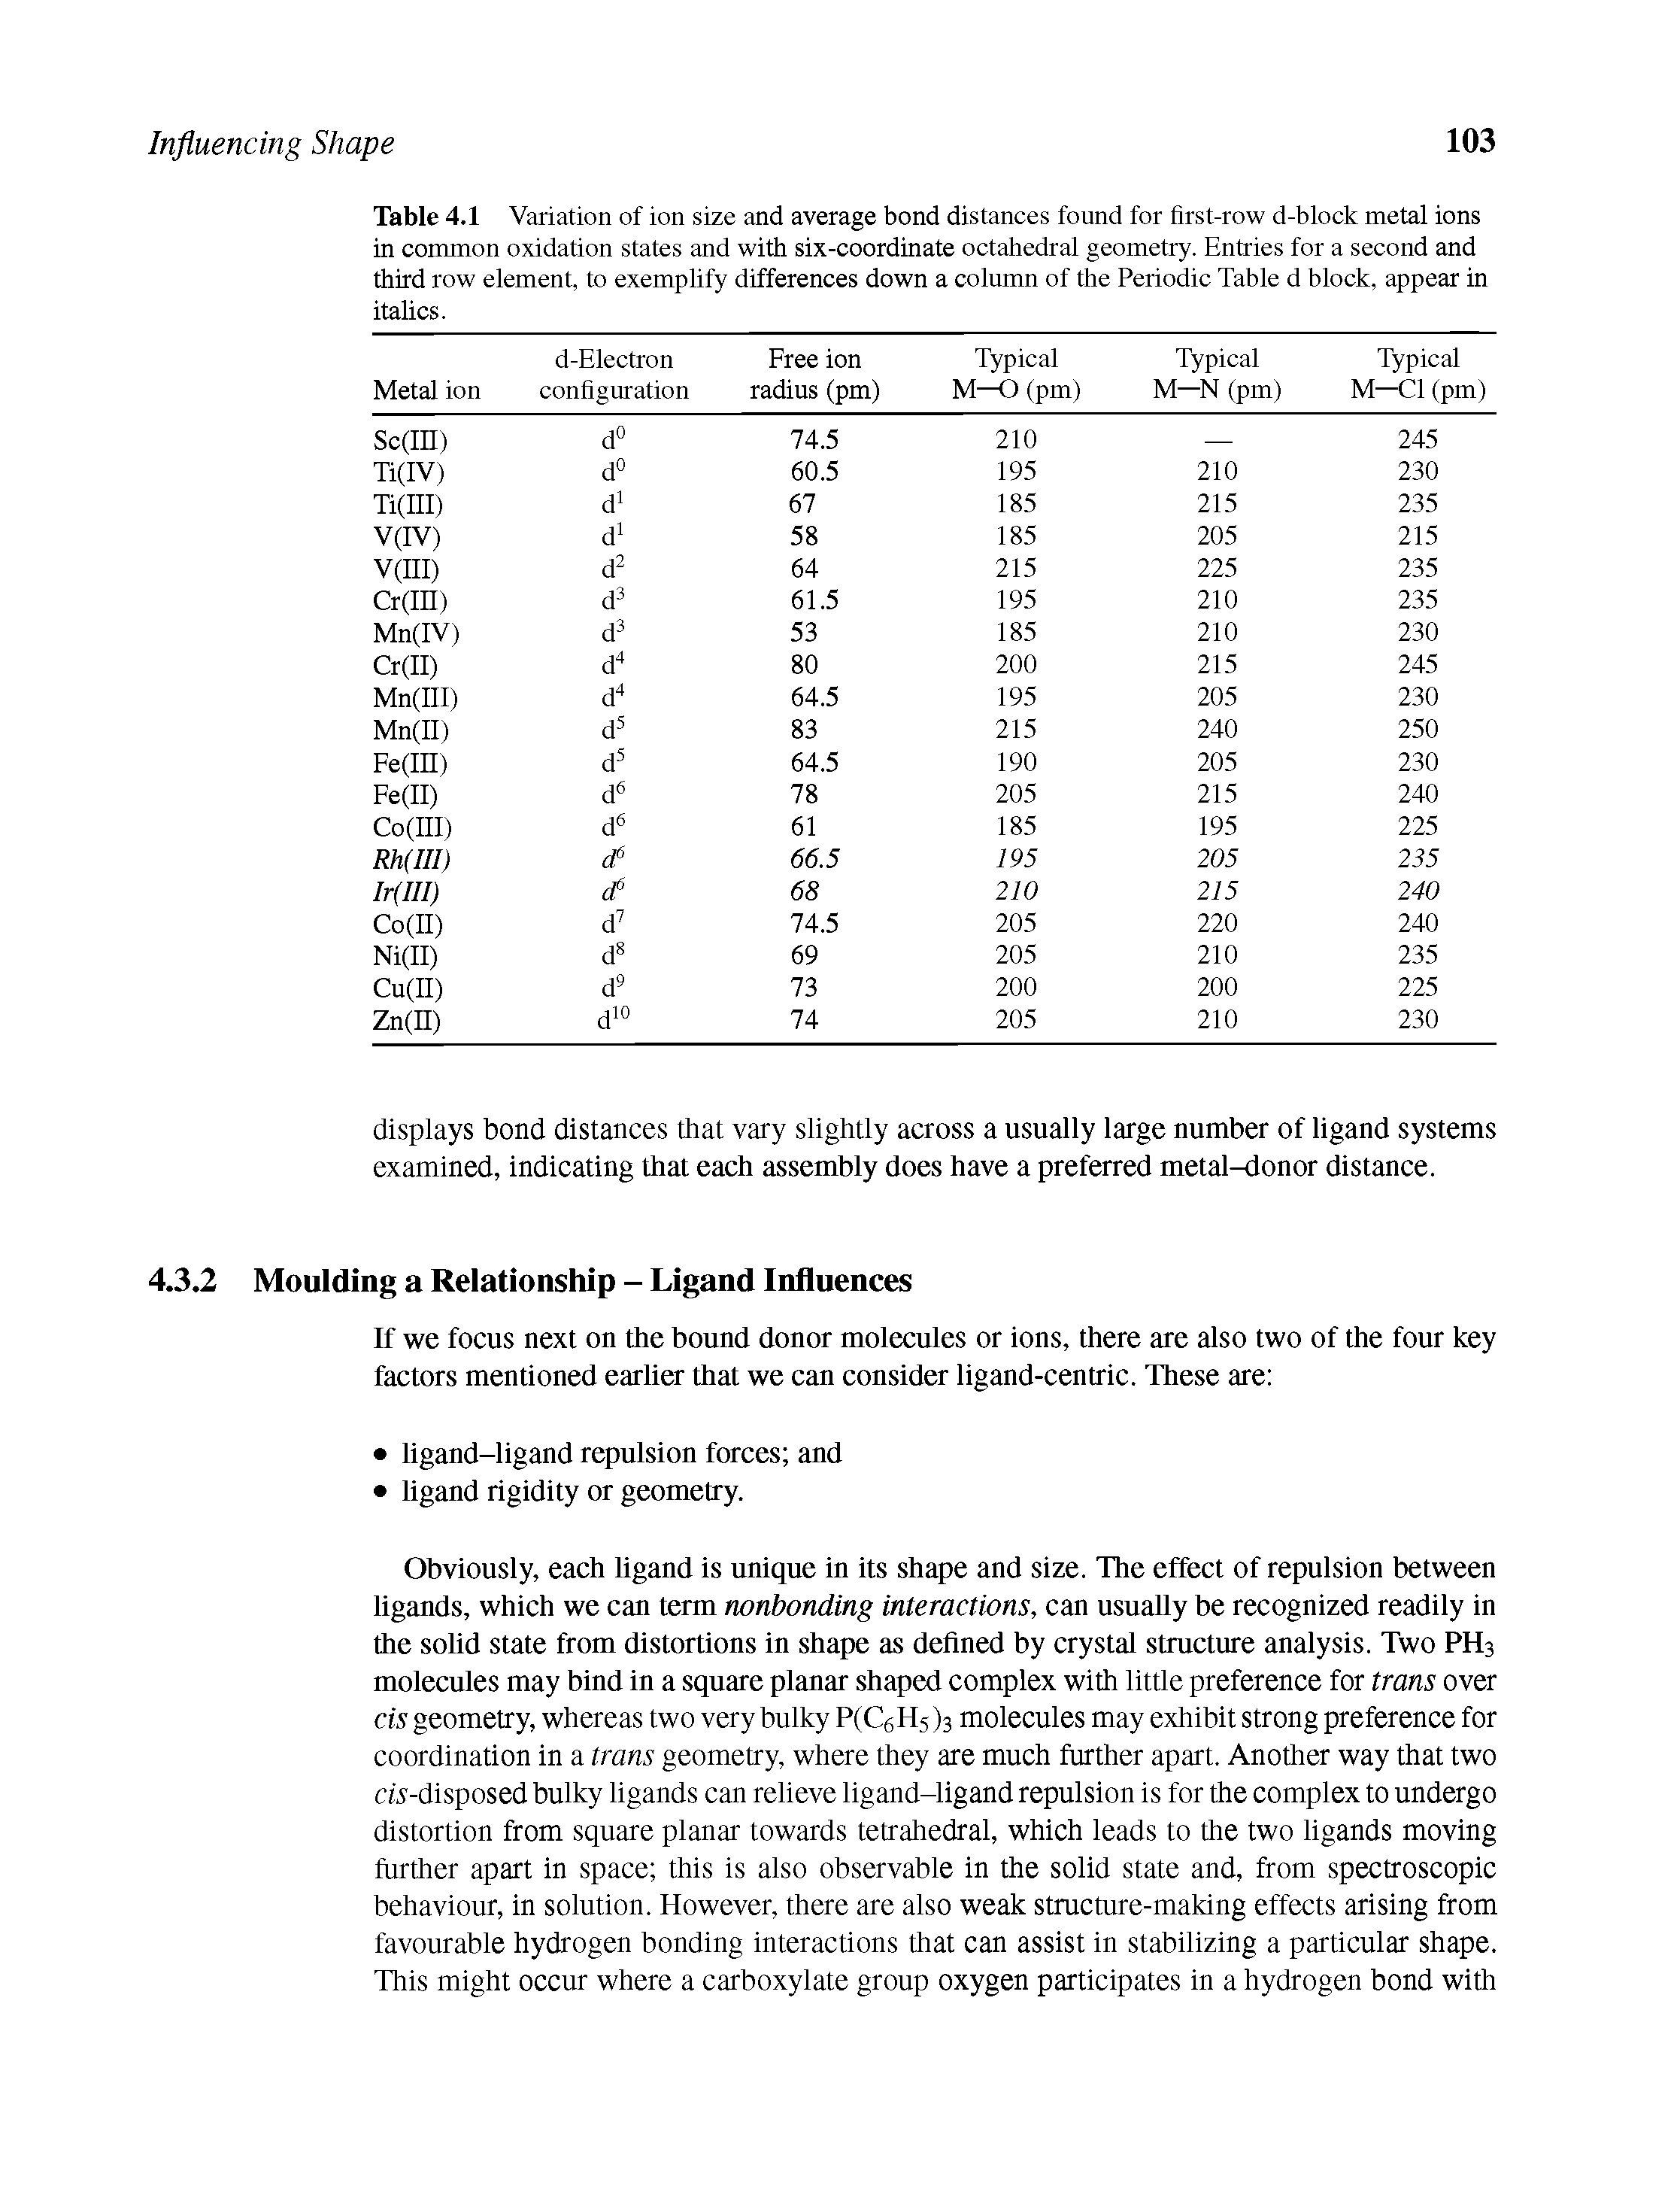 Table 4.1 Variation of ion size and average bond distances found for first-row d-block metal ions in common oxidation states and with six-coordinate octahedral geometry. Entries for a second and third row element, to exemplify differences down a column of the Periodic Table d block, appear in italics.